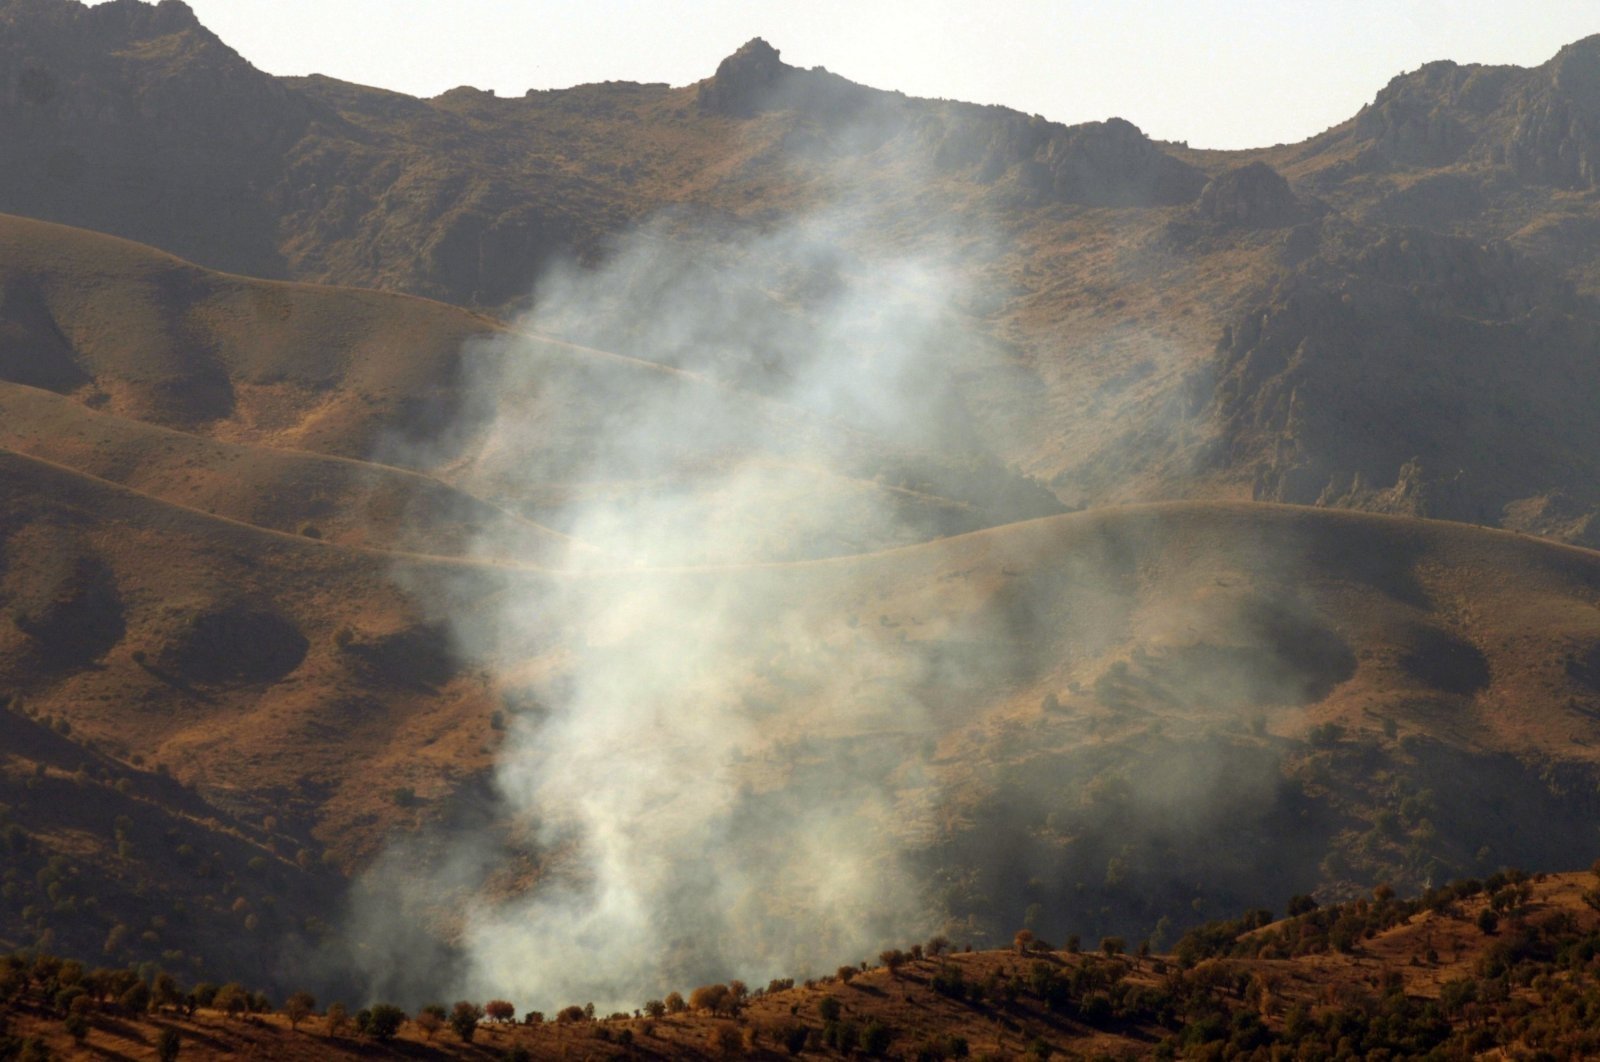 Smoke billows from Mount Cudi, near the Iraqi border in the southeastern province of Şırnak, Turkey, Oct. 30, 2007. (Getty Images)